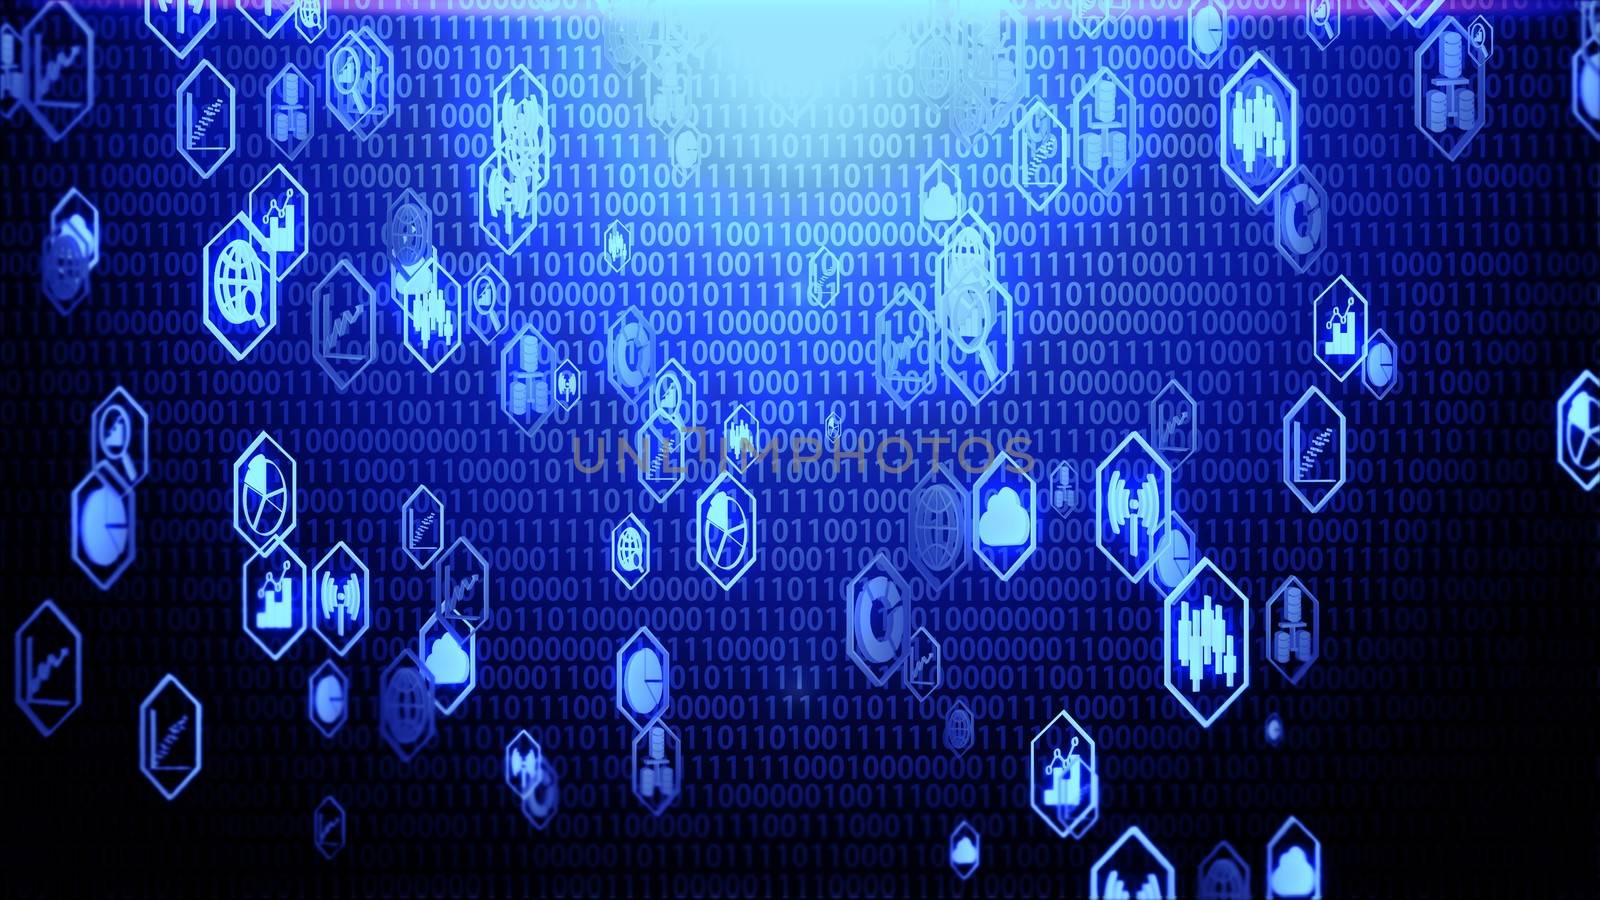 3D Big Data Icon Set in Hexagon Border Hovering on The Randoming Binary Code Background with Blue Lighting by ariya23156